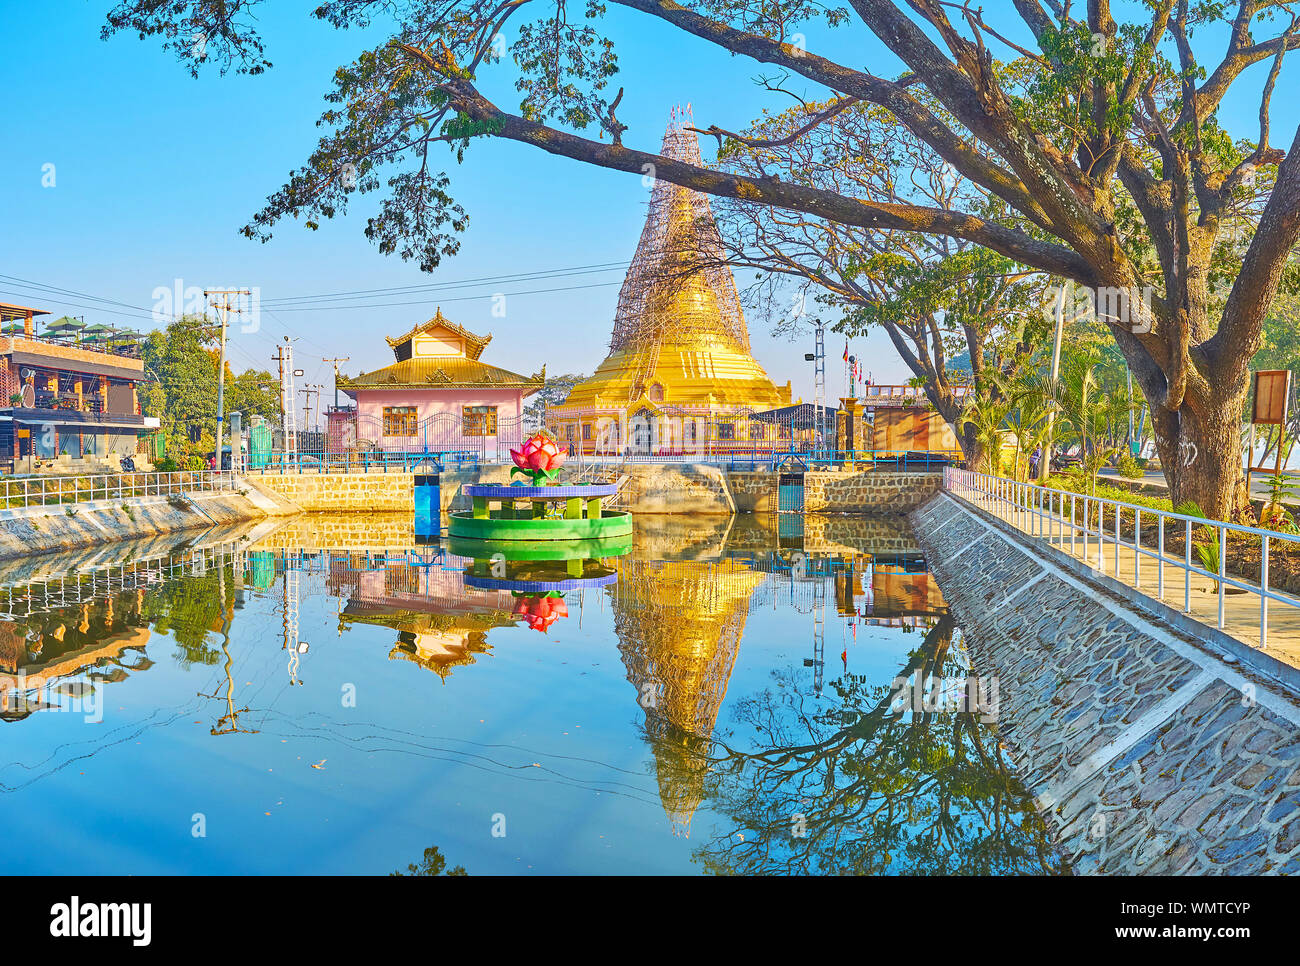 The scenic lotus fountain in front of the gilt Shwe Baww Di Pagoda, Nyaungshwe, Myanmar Stock Photo